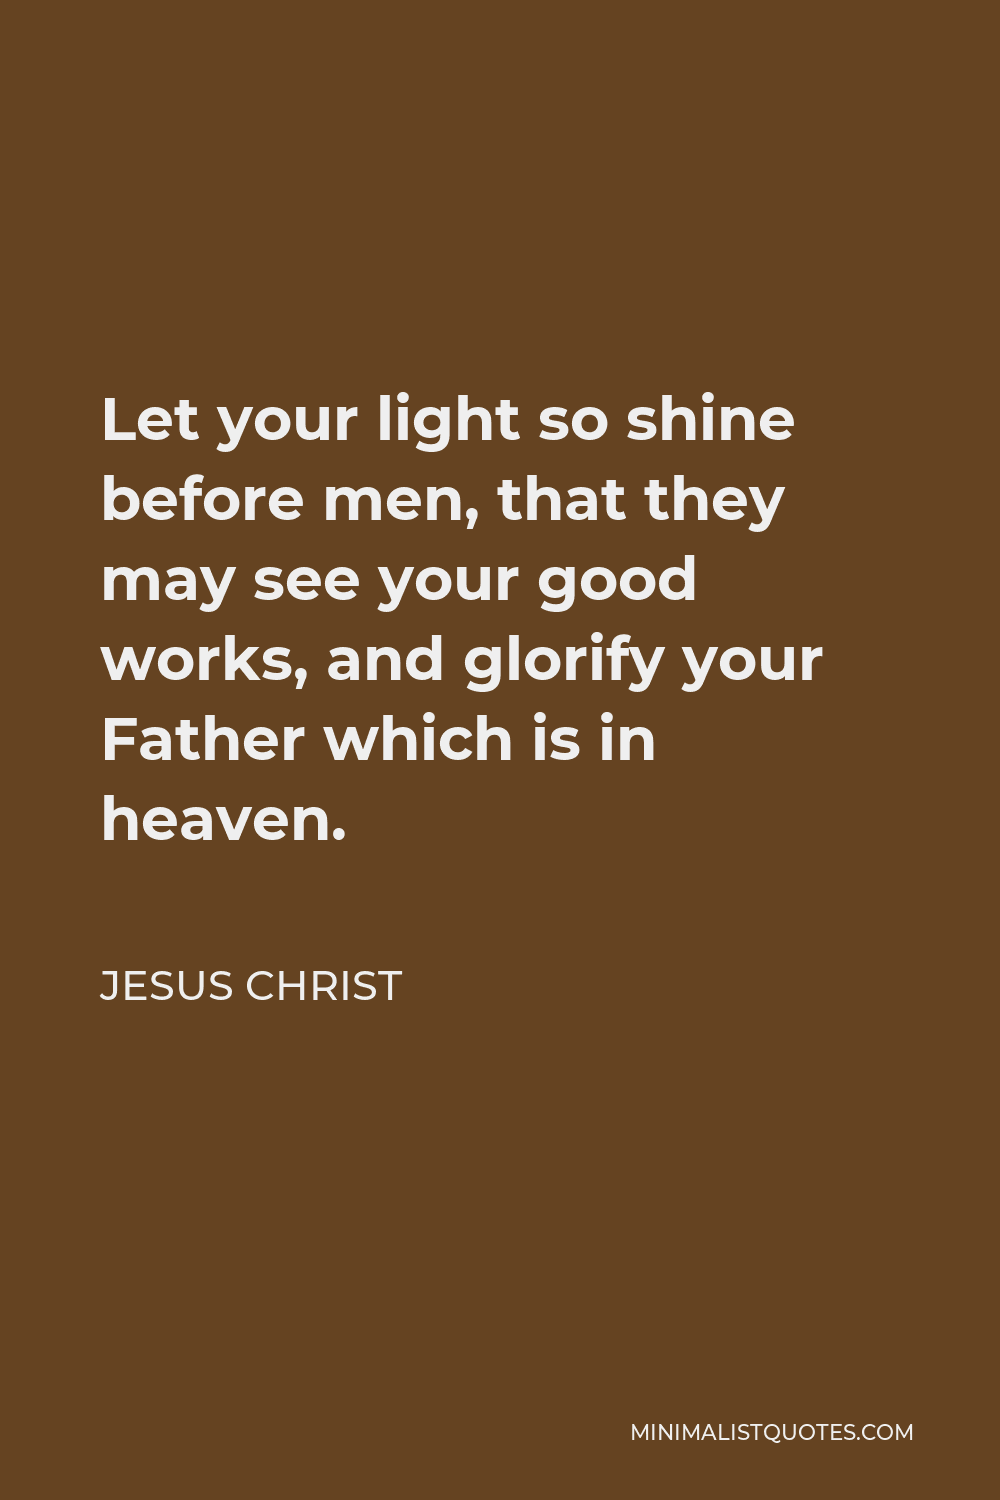 Jesus Christ Quote - Let your light so shine before men, that they may see your good works, and glorify your Father which is in heaven.